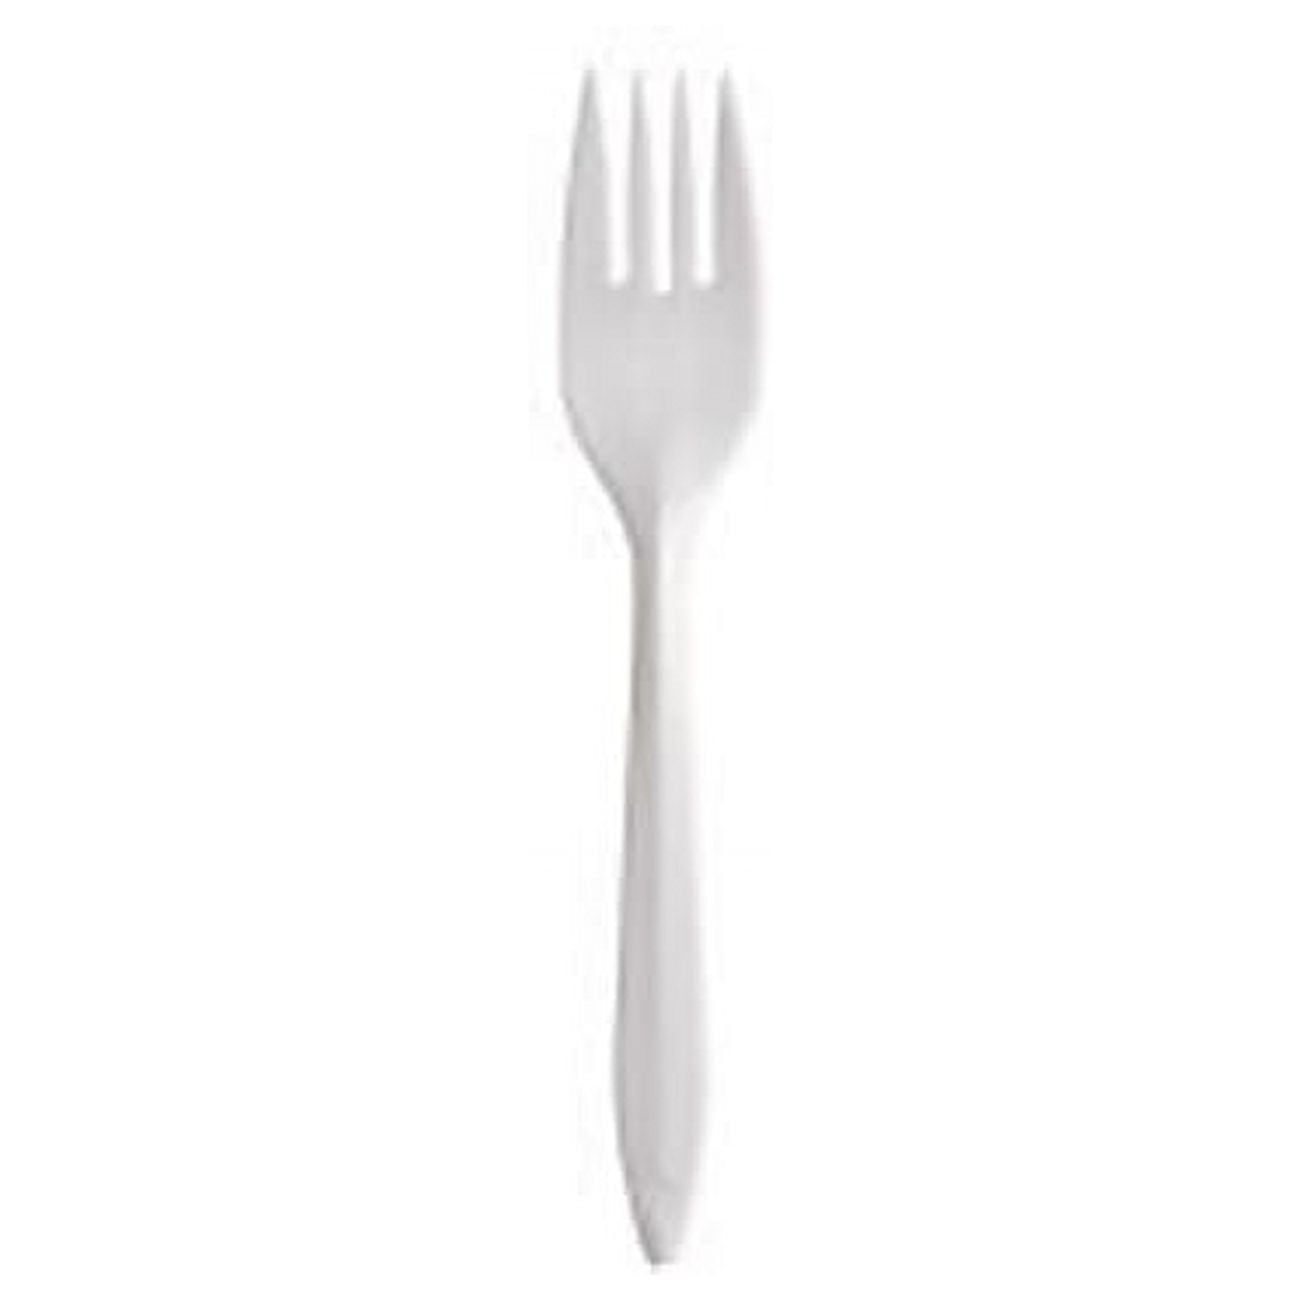 F6bw Cpc 6.25 In. Medium Weight Polypropylene Fork Cutlery Style Setter, White - Case Of 1000